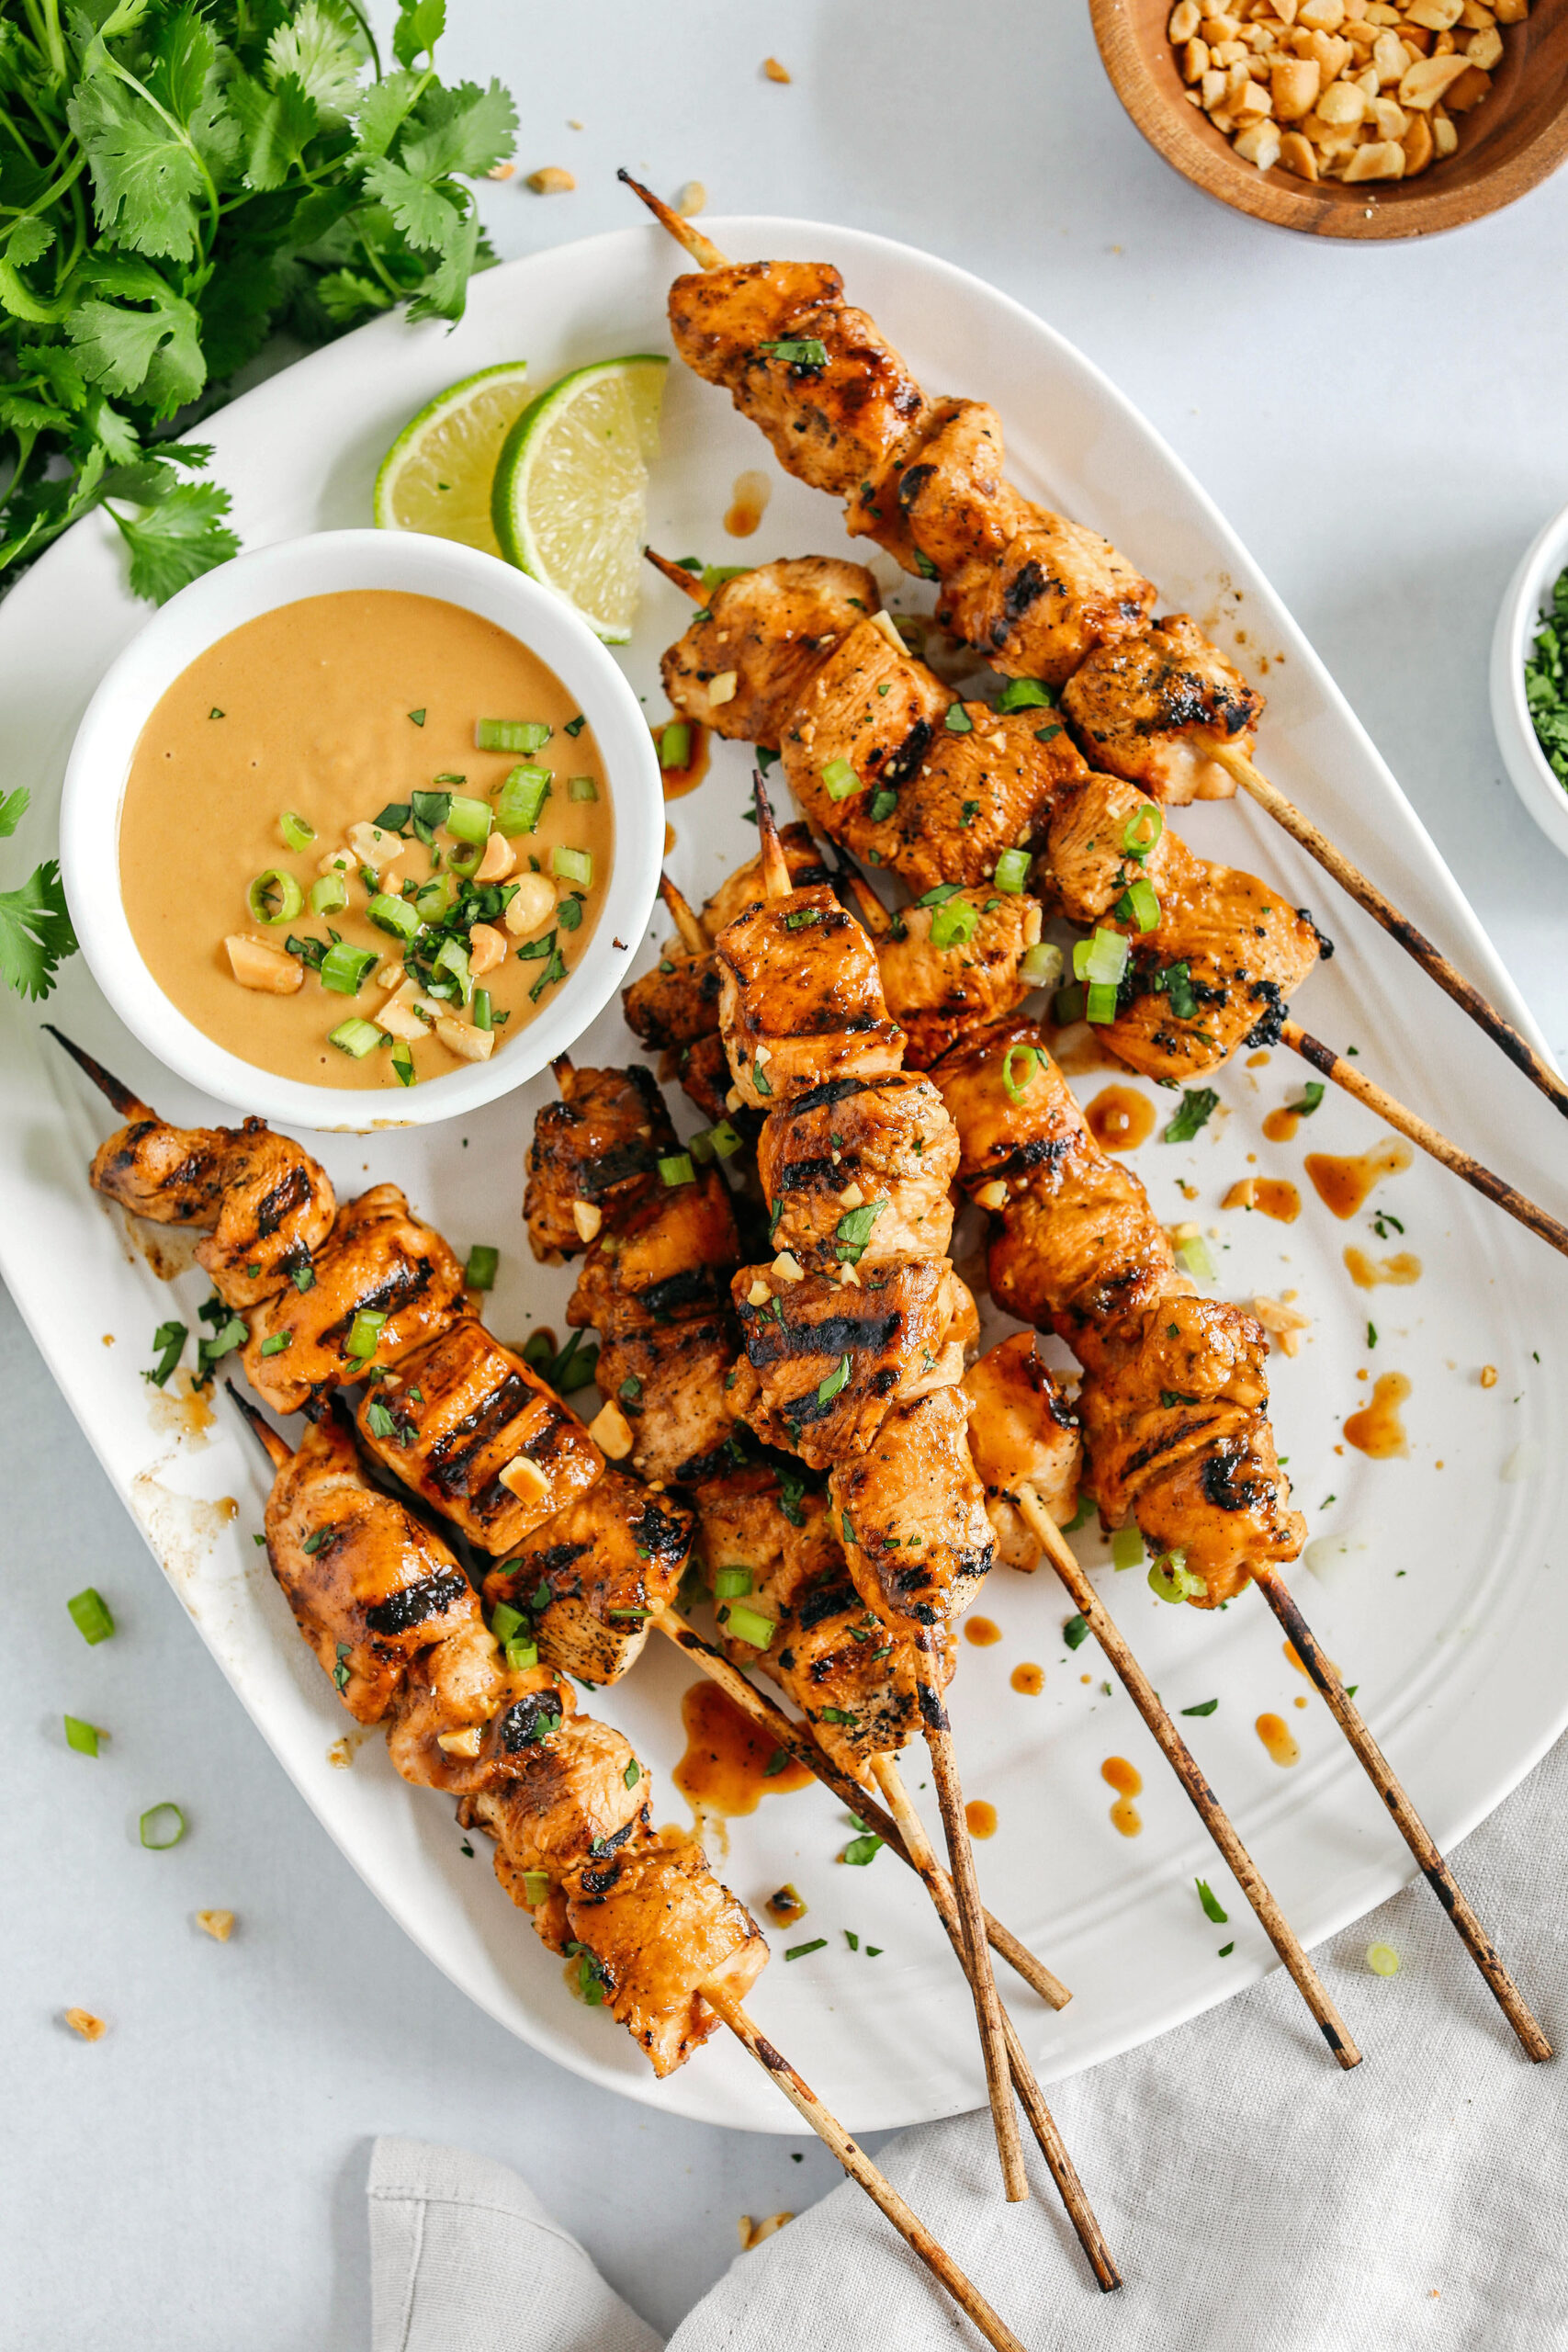 Tender and juicy Chicken Satay marinated in the most delicious peanut ginger sauce and grilled to perfection for the perfect easy weeknight dinner!  Serve over rice or salad and drizzled with my homemade peanut sauce.